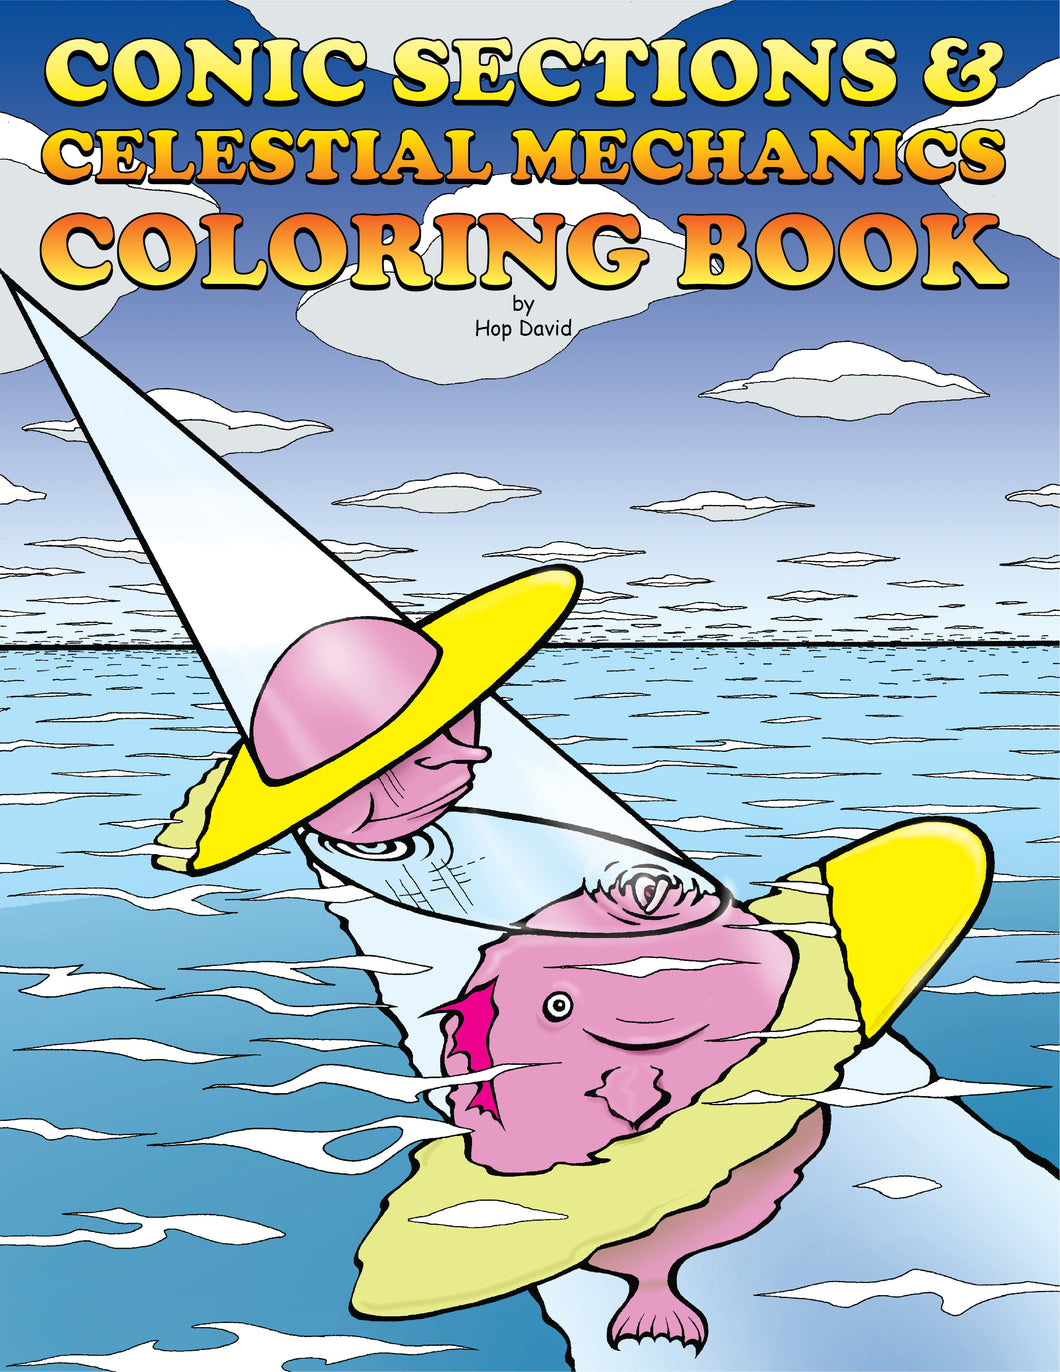 Conic Sections and Celestial Mechanics Coloring Book